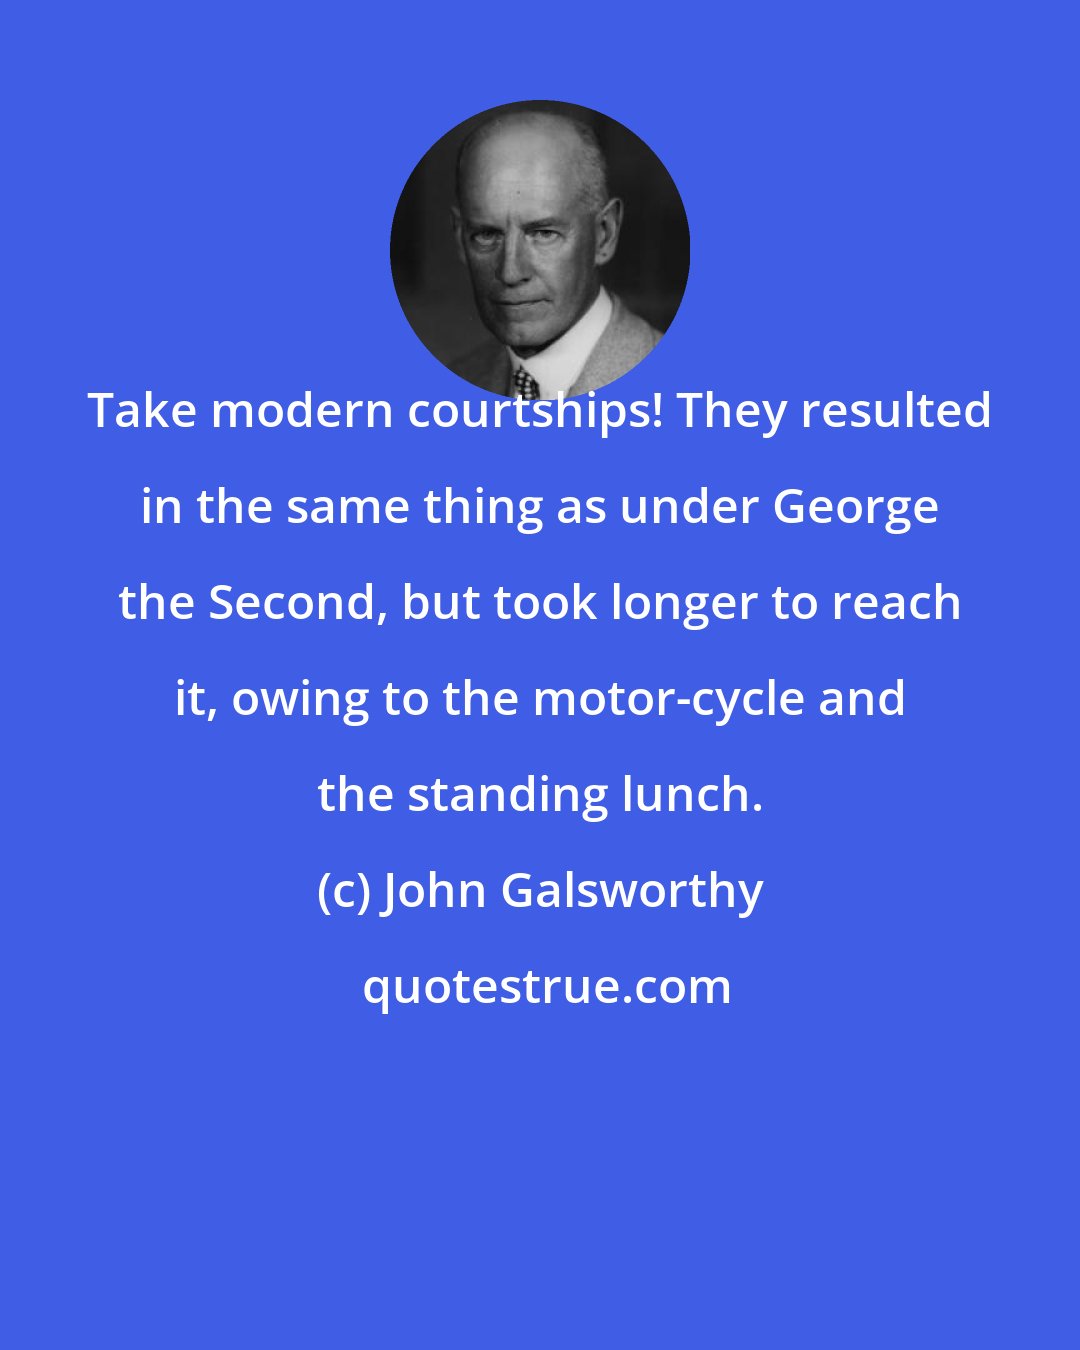 John Galsworthy: Take modern courtships! They resulted in the same thing as under George the Second, but took longer to reach it, owing to the motor-cycle and the standing lunch.